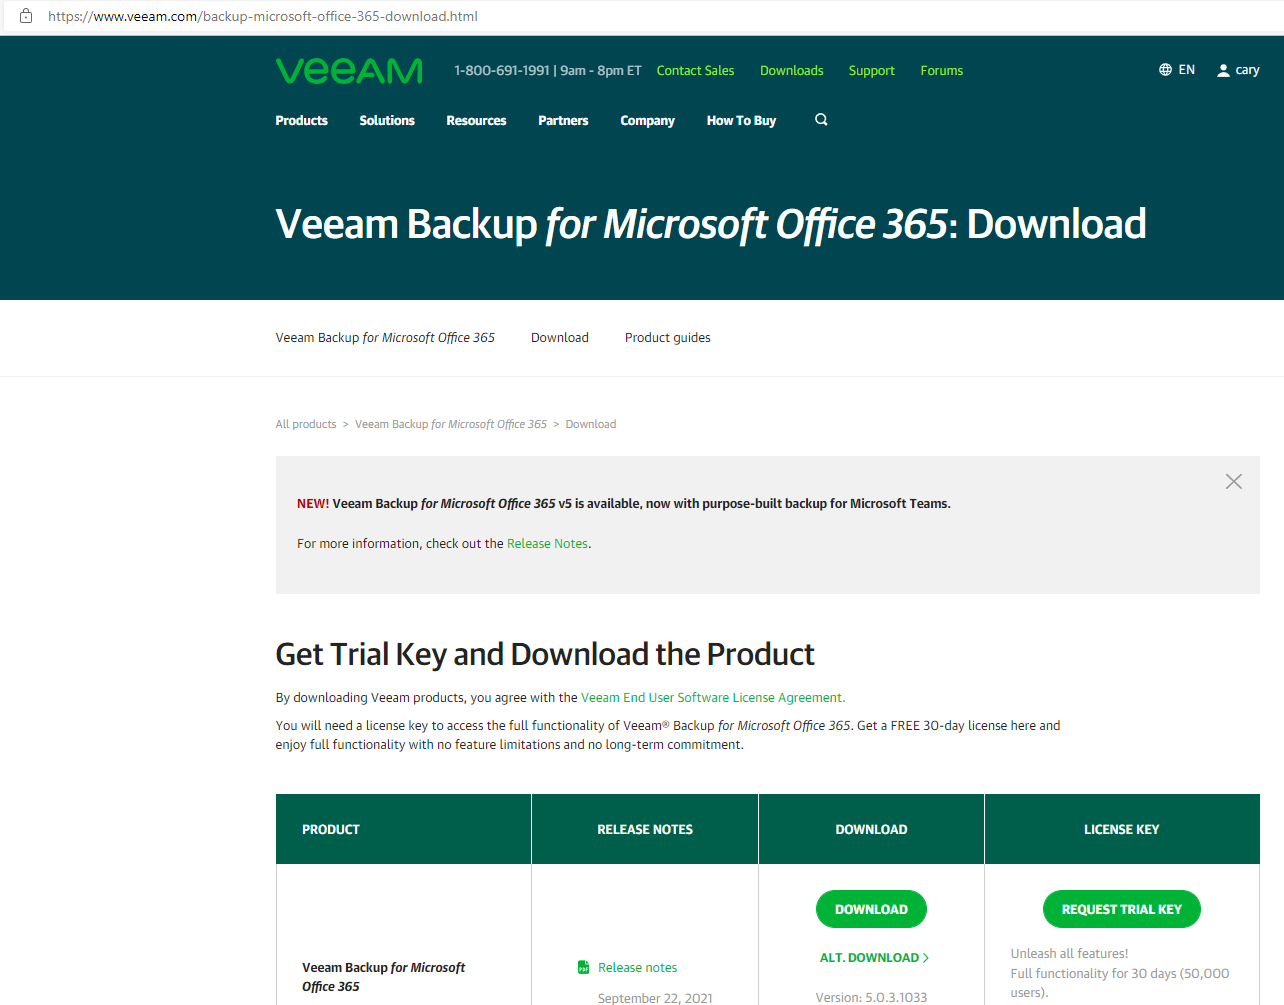 121421 0216 HowtoUpgrad1 - How to Upgrade Veeam Backup for Microsoft Office 365 to V5d